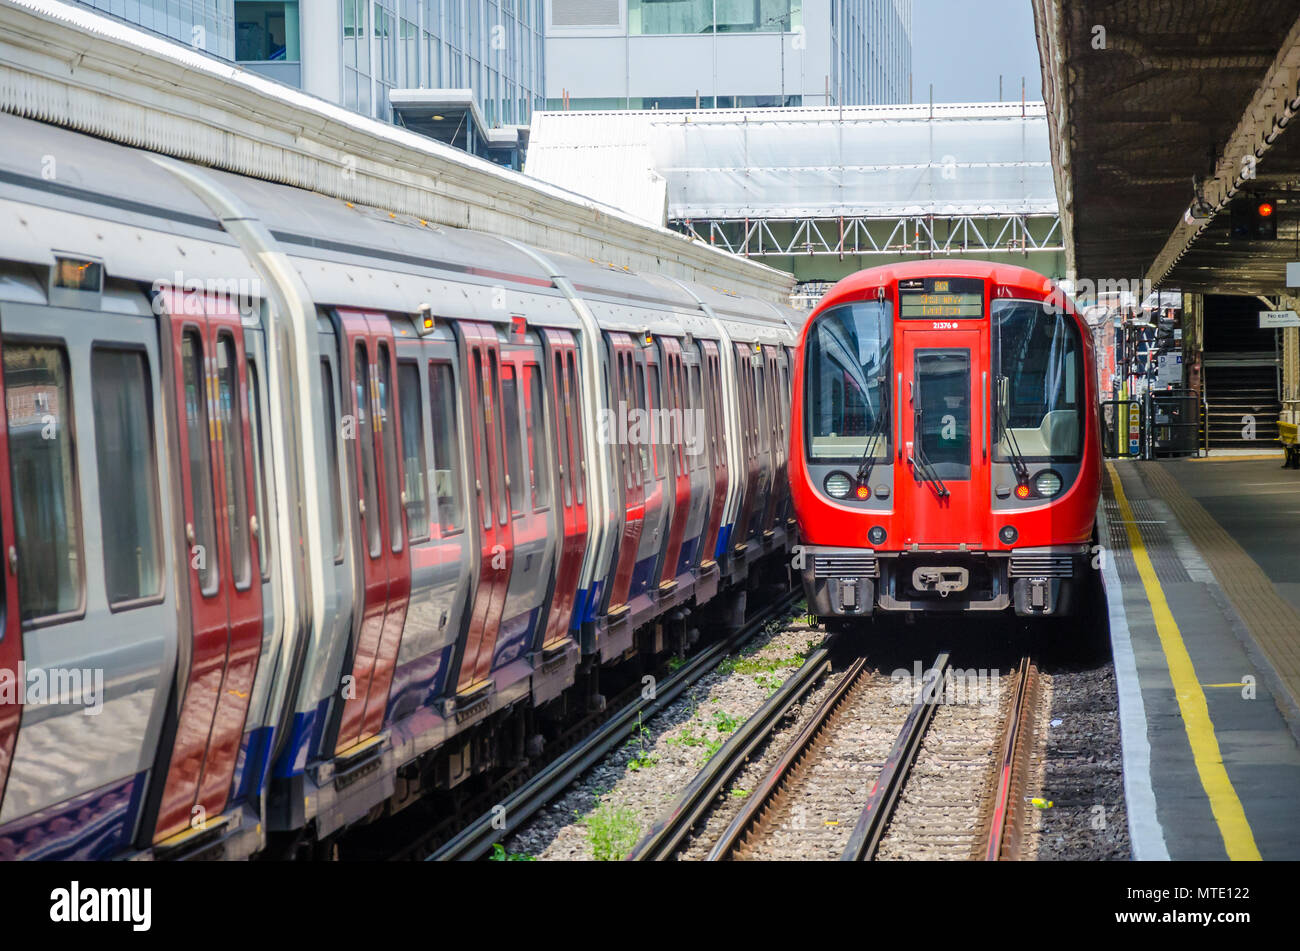 A train departs from the platform at Hammersmith London Underground Station. Stock Photo